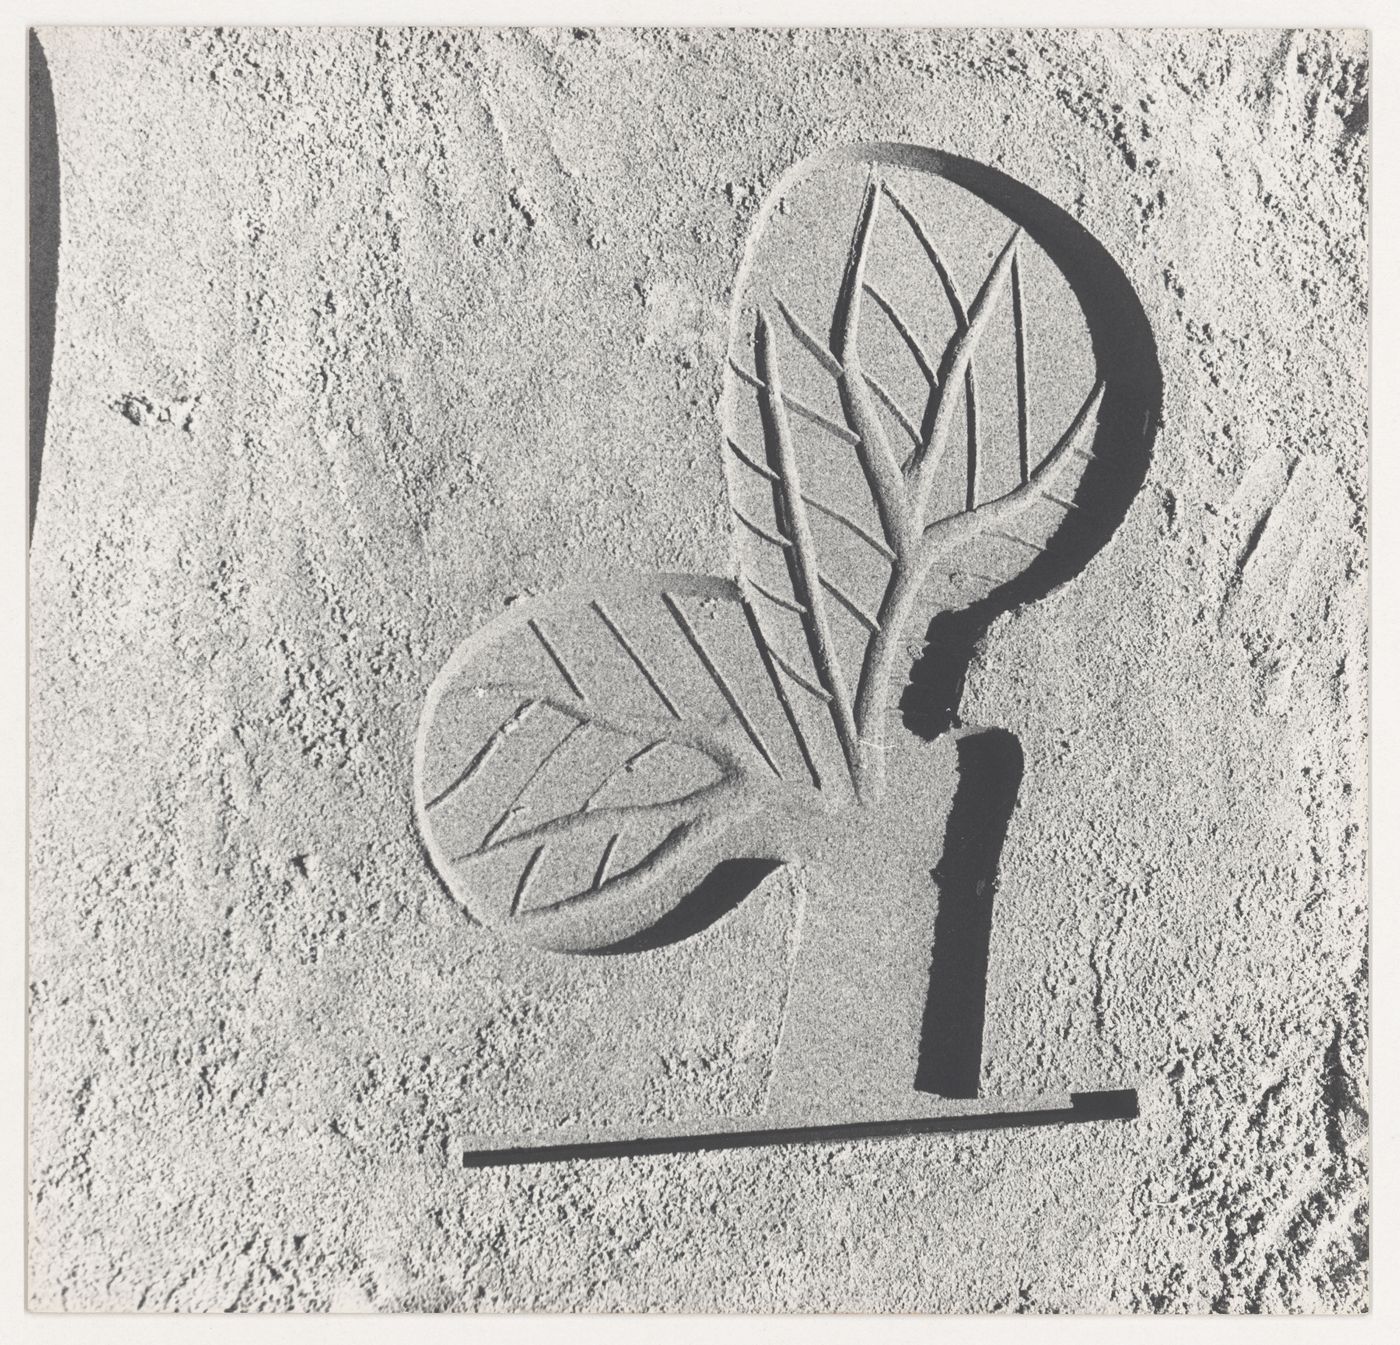 View of a bas-relief of a sign by Le Corbusier, Chandigarh, India